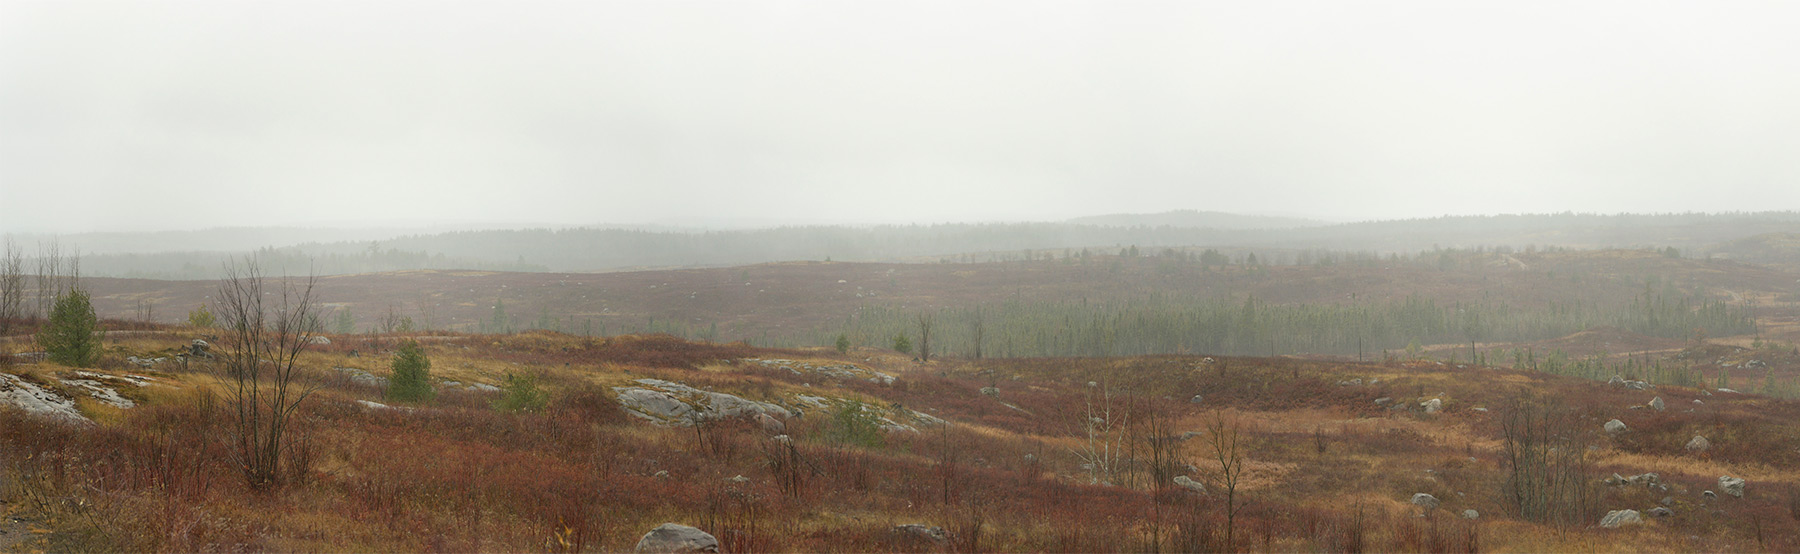 Panoramic photo of a landscape with bare trees under a grey sky